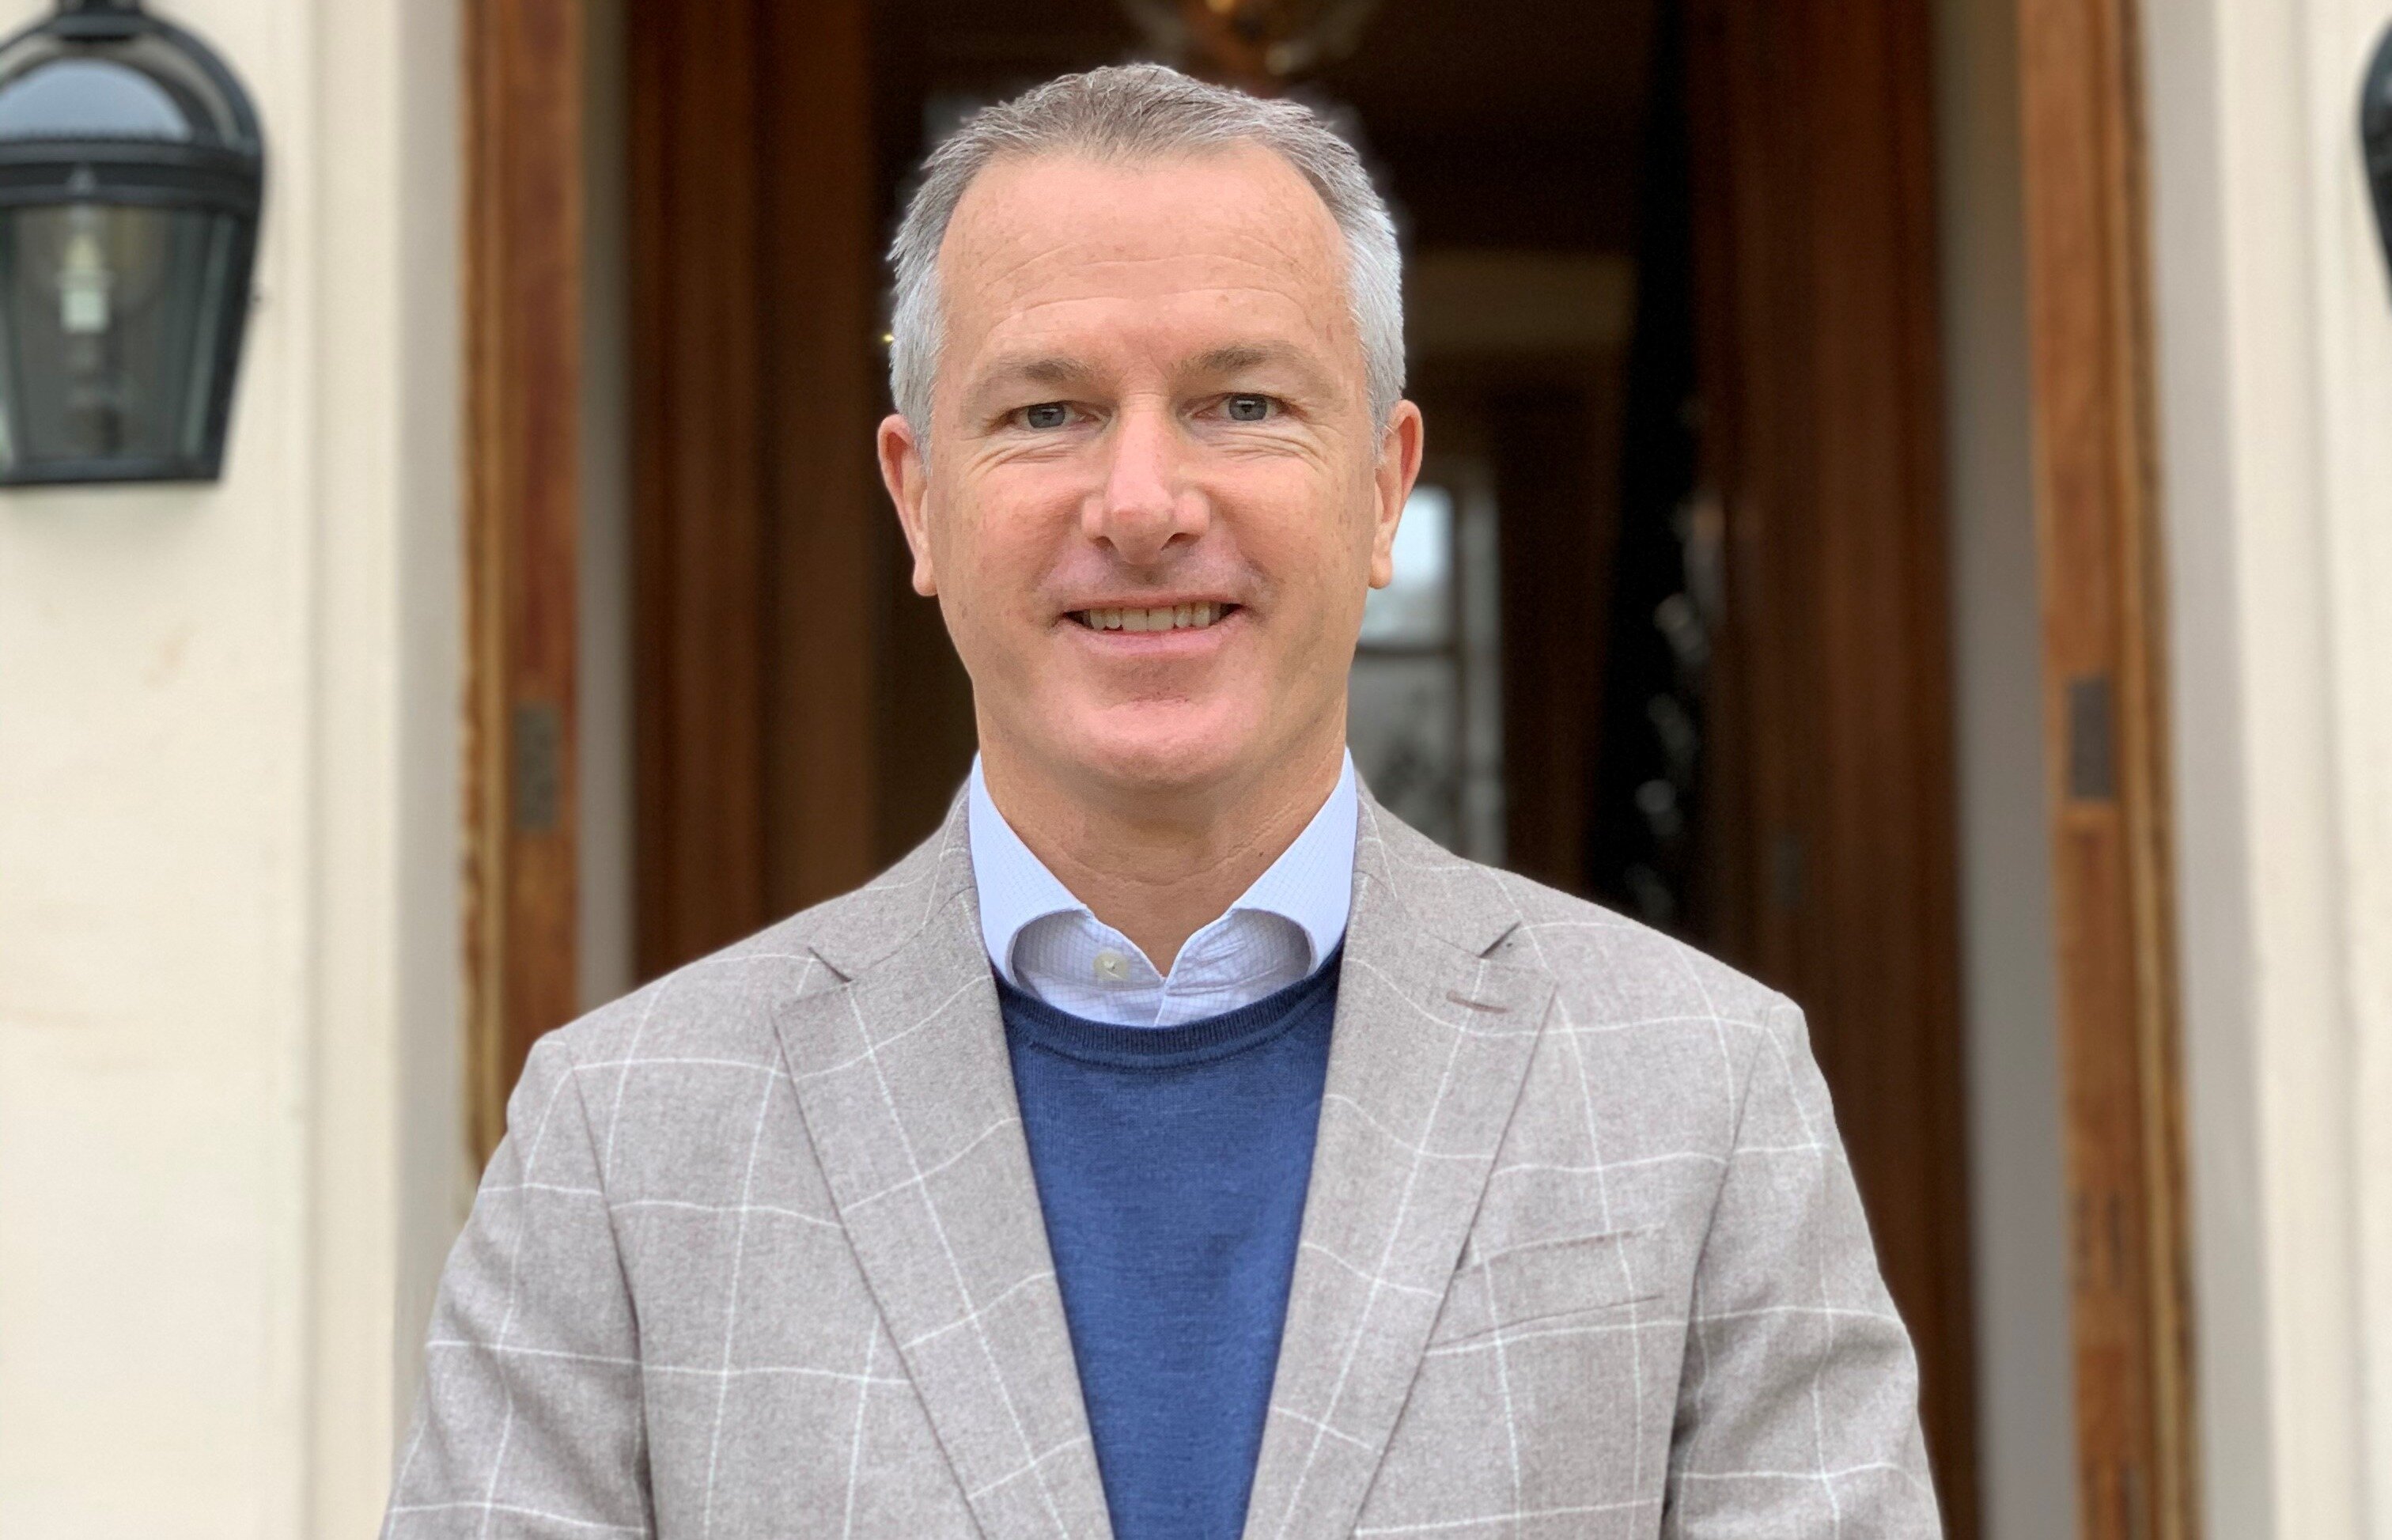 Kevin Brooke appointed general manager of Heckfield Place